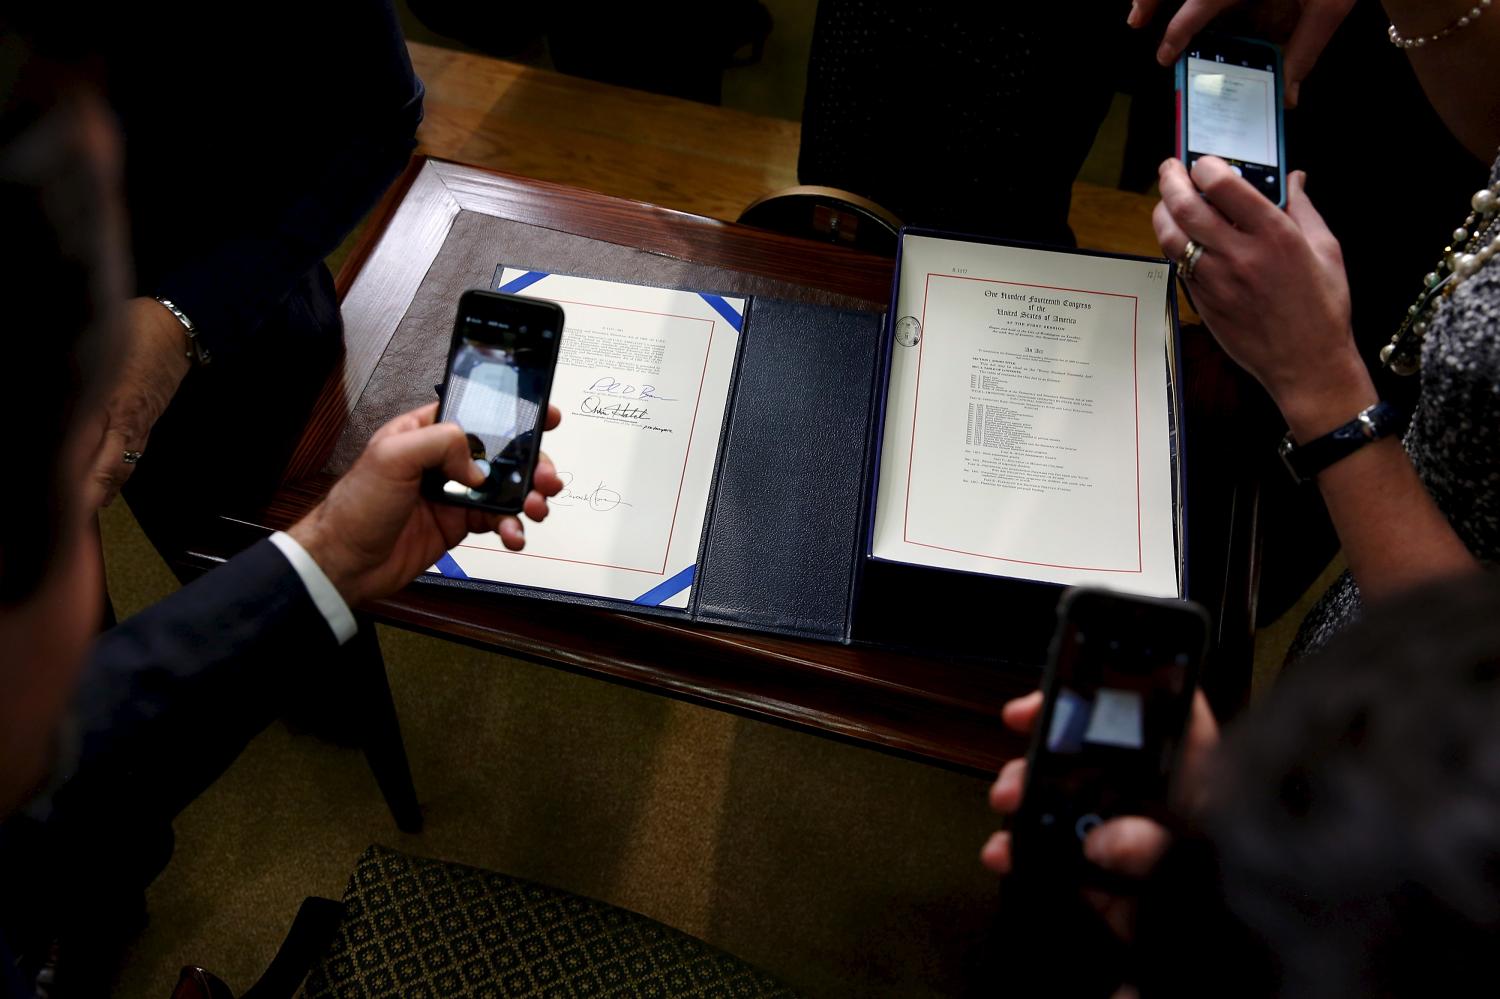 Guests take pictures of the Every Student Succeeds Act after U.S. President Barack Obama signed it into law in the Eisenhower Executive Office Building at the White House in Washington, December 10, 2015.